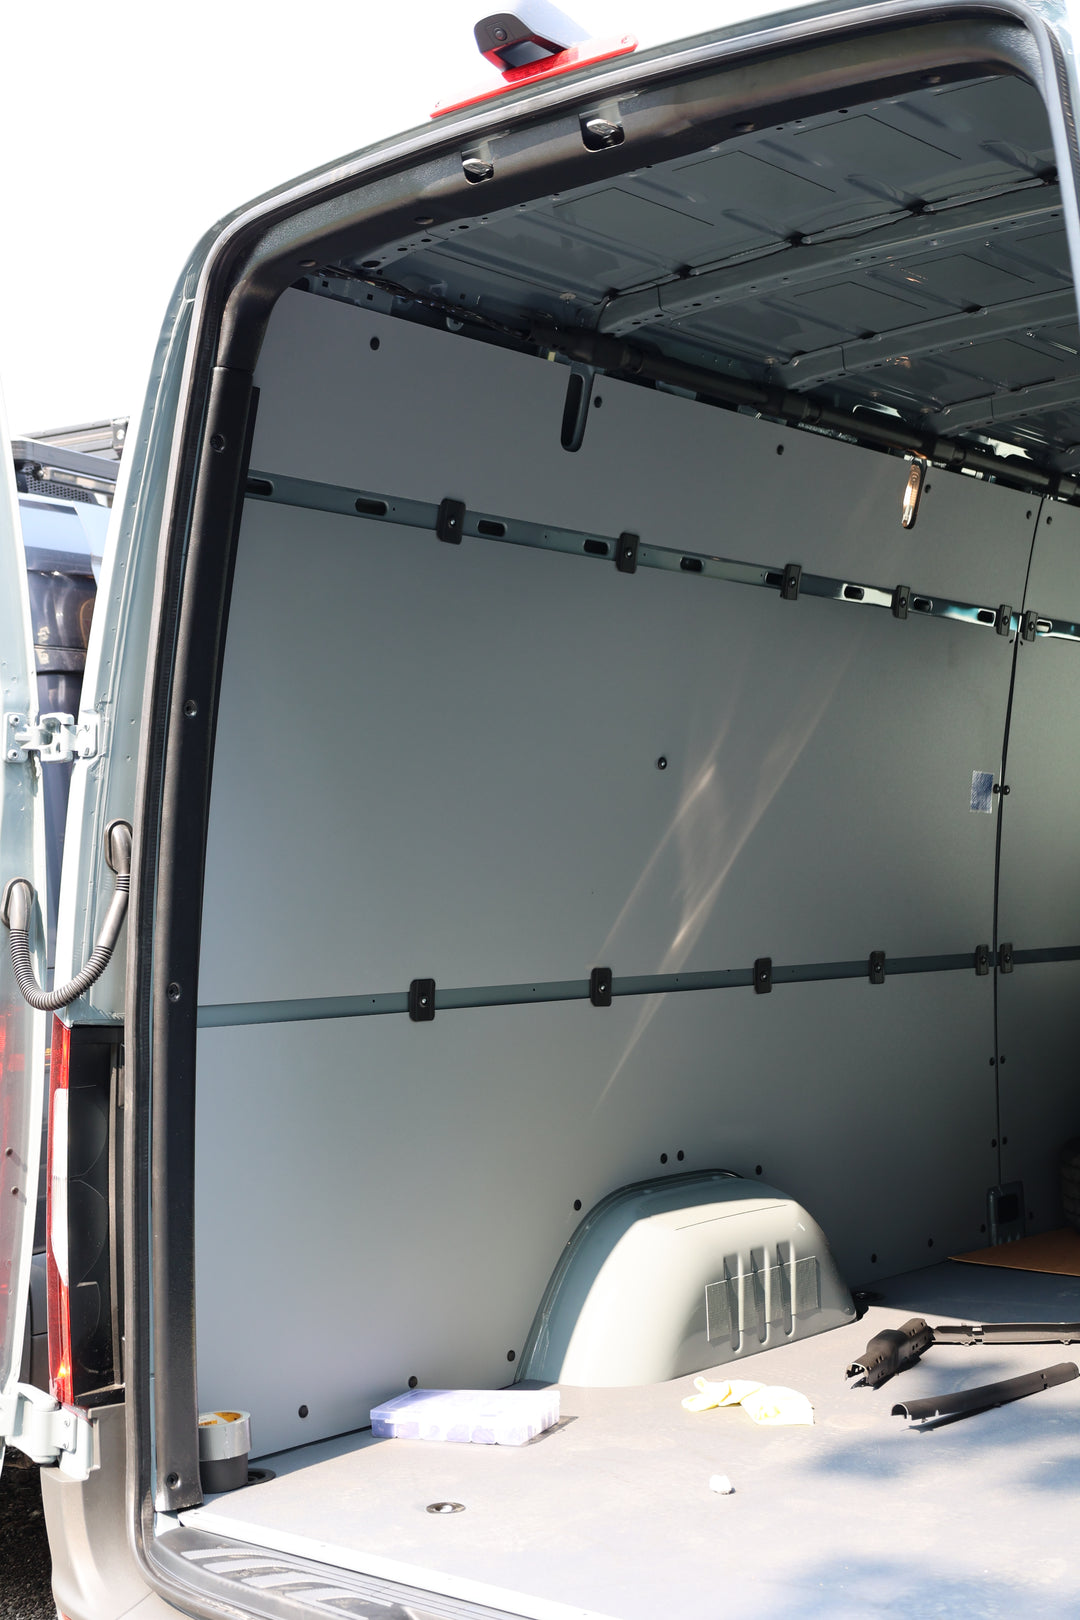 The Threshold Around the Rear Door of the Mercedes Sprinter